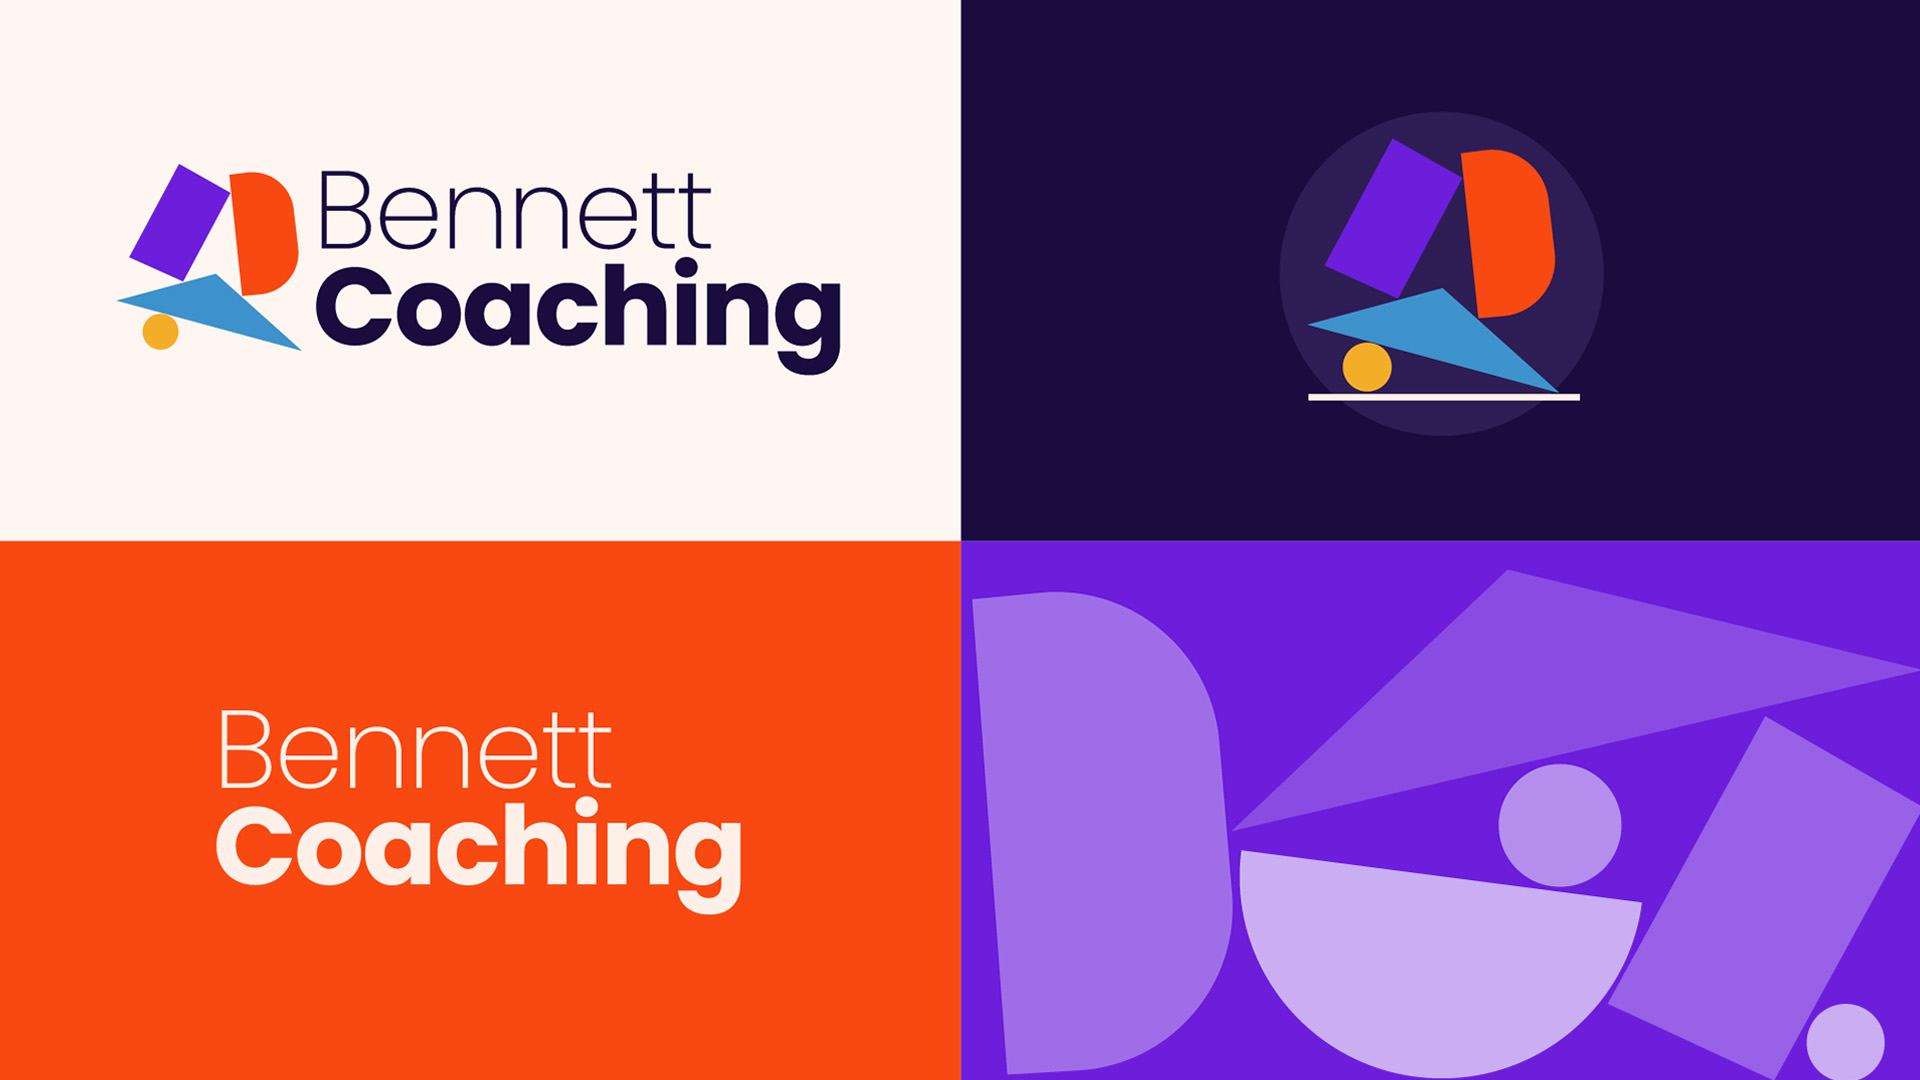 featured image four:Bennet Coaching Brand System